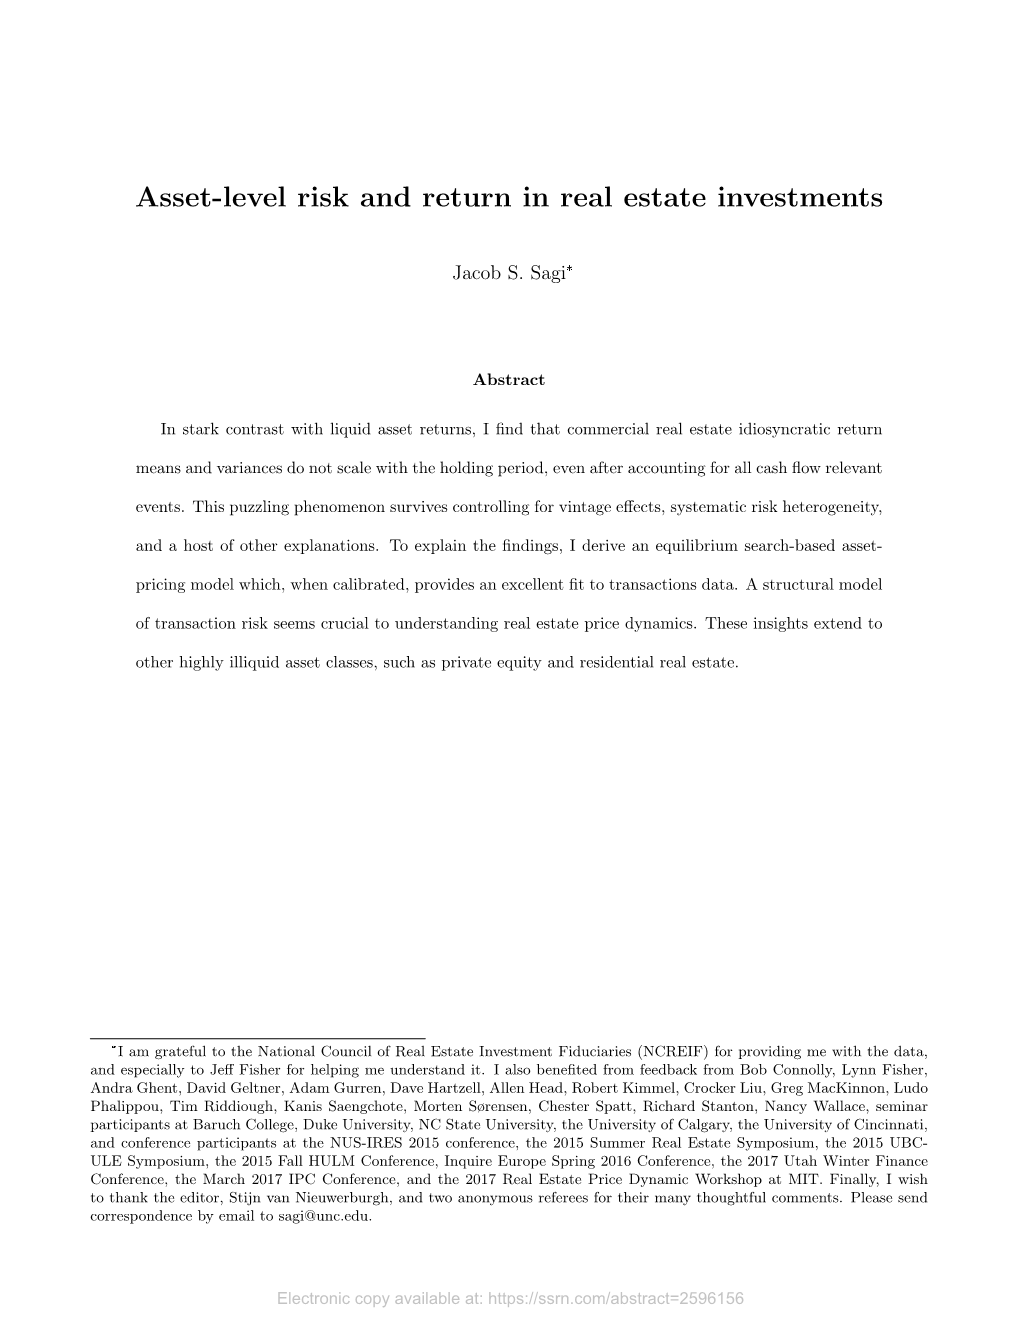 Asset-Level Risk and Return in Real Estate Investments